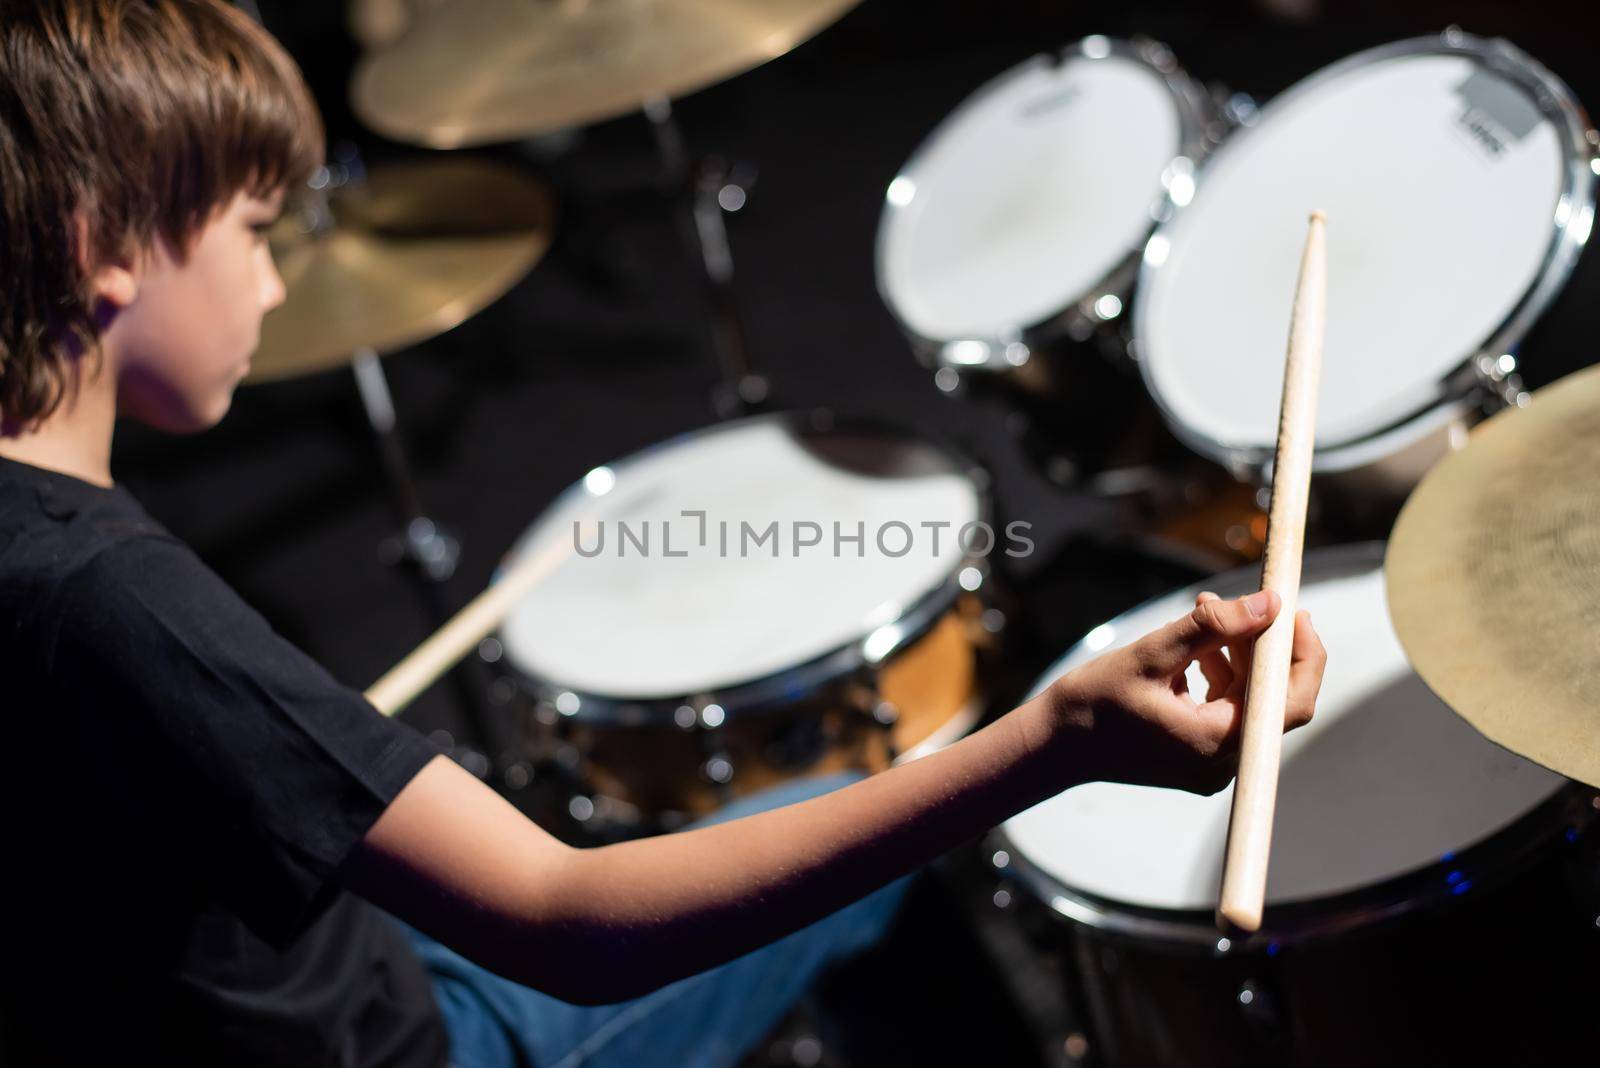 A boy plays drums in a recording studio by mrwed54